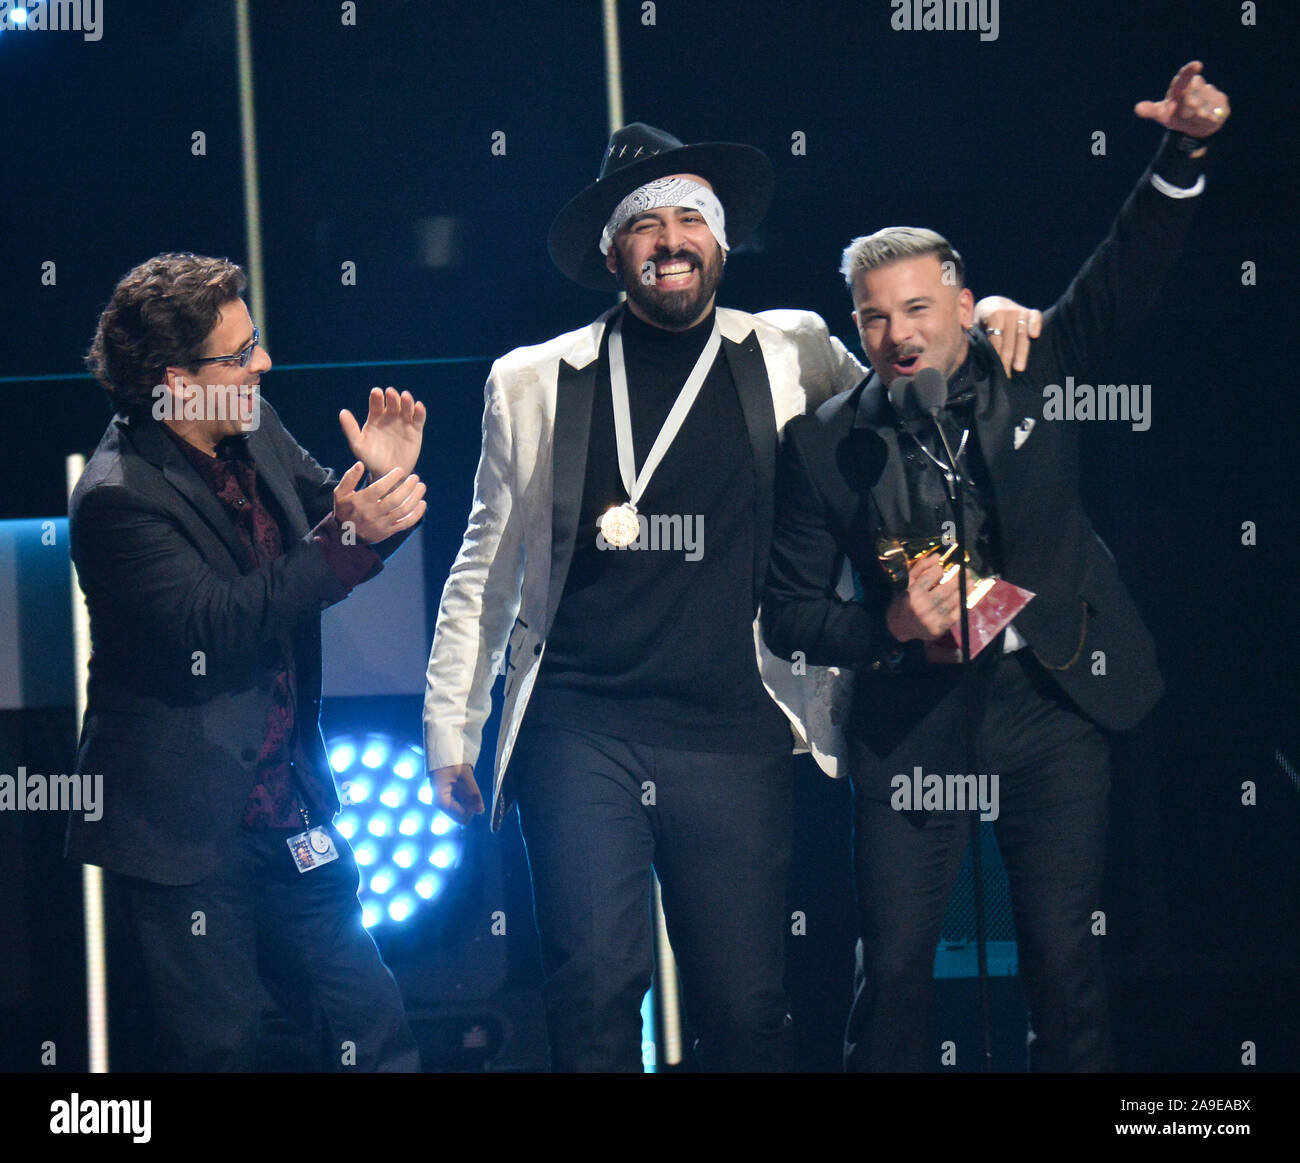 Las Vegas, United States. 14th Nov, 2019. (L-R) George Noriega, Gabriel Edgar González Pérez and Pedro Capo accept their Song of the Year award during the 20th annual Latin Grammy Awards honoring Columbian singer Juanes at the MGM Grand Convention Center in Las Vegas, Nevada on Thursday, November 14, 2019. Photo by Jim Ruymen/UPII Credit: UPI/Alamy Live News Stock Photo